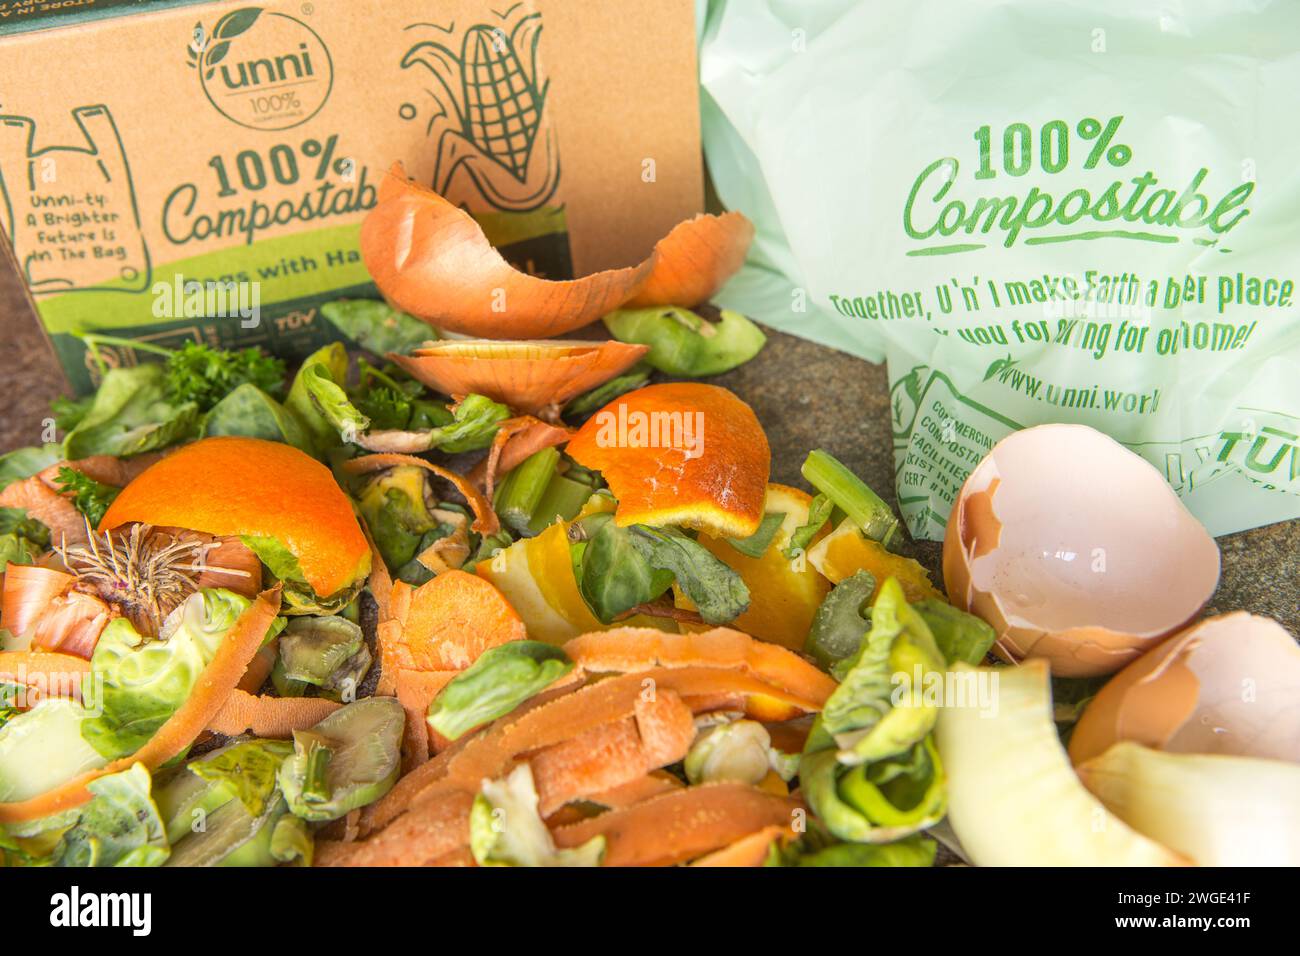 100% compostable bags and food waste for composting California USA Stock Photo